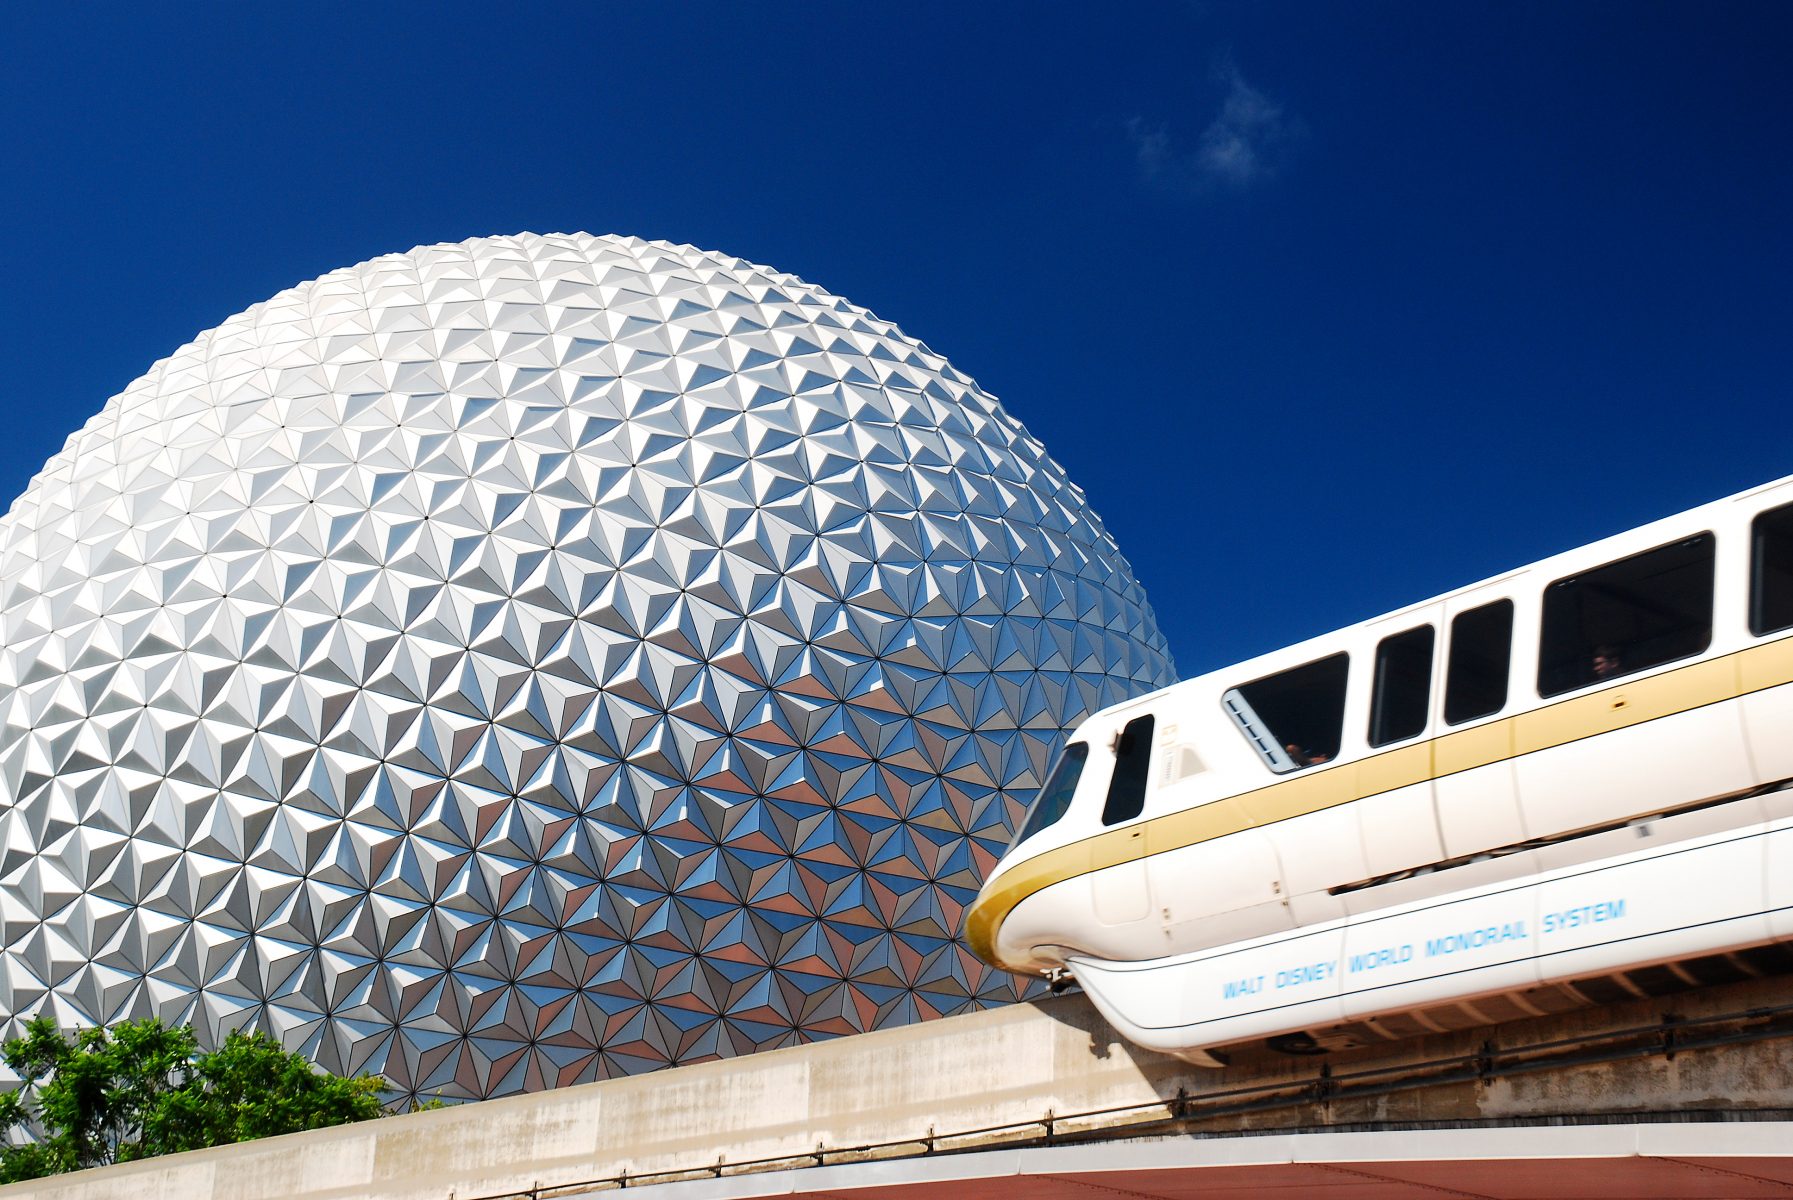 Monorail in front of Epcot